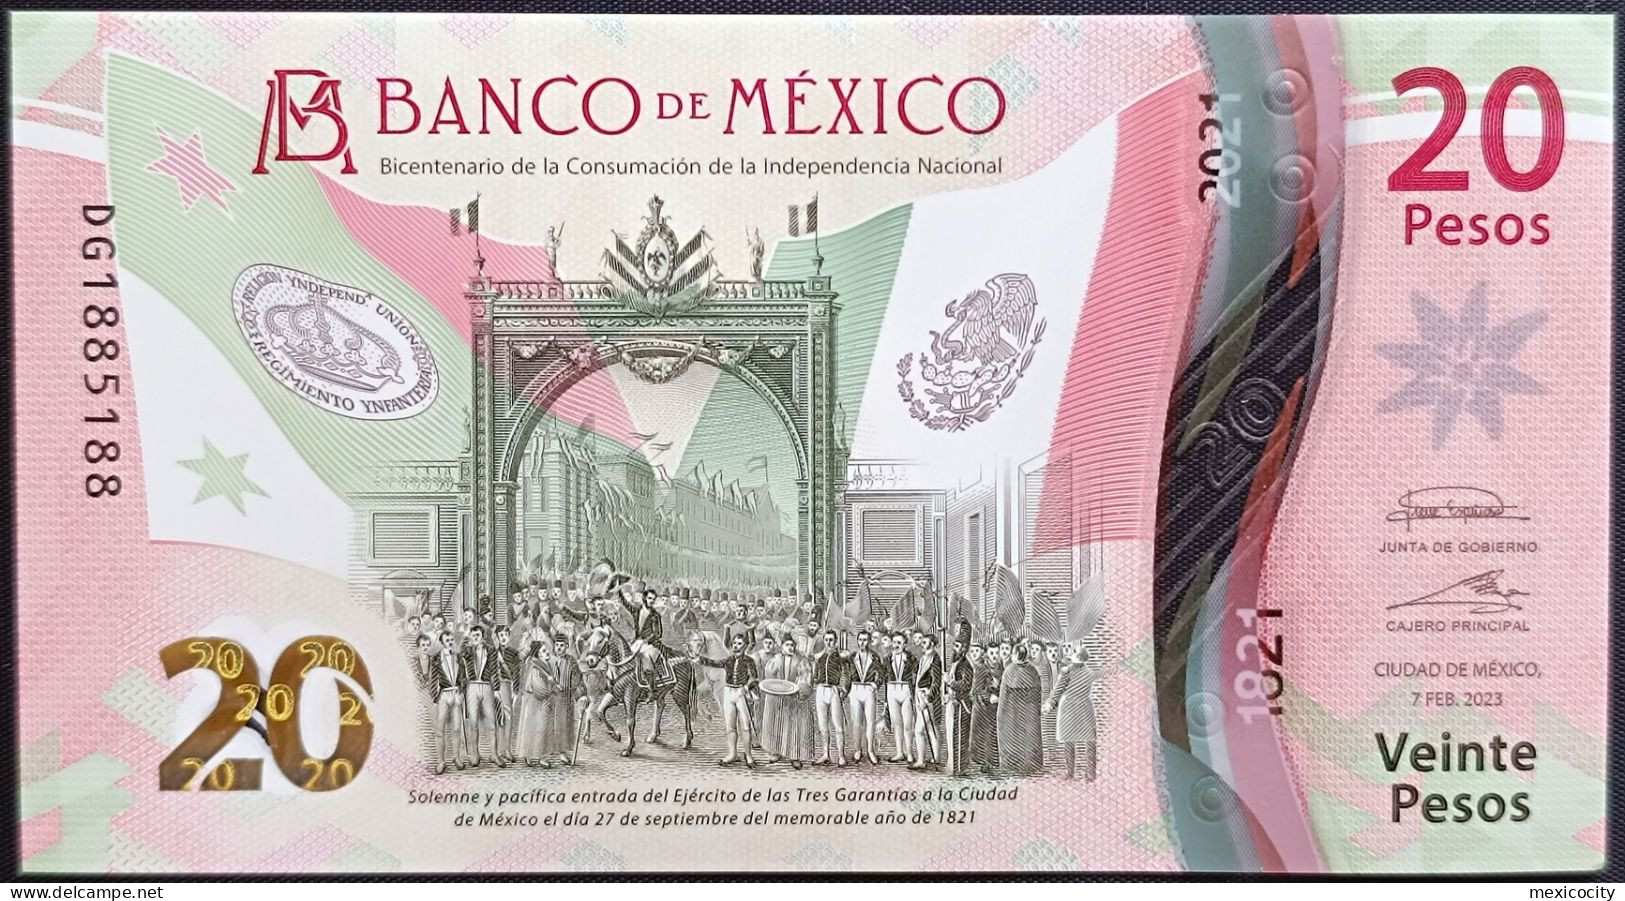 MEXICO $20 SERIES DG1885188 REPEAT # - 7-FEBR-2023 INDEPENDENCE POLYMER NOTE BU Mint Crisp - Messico